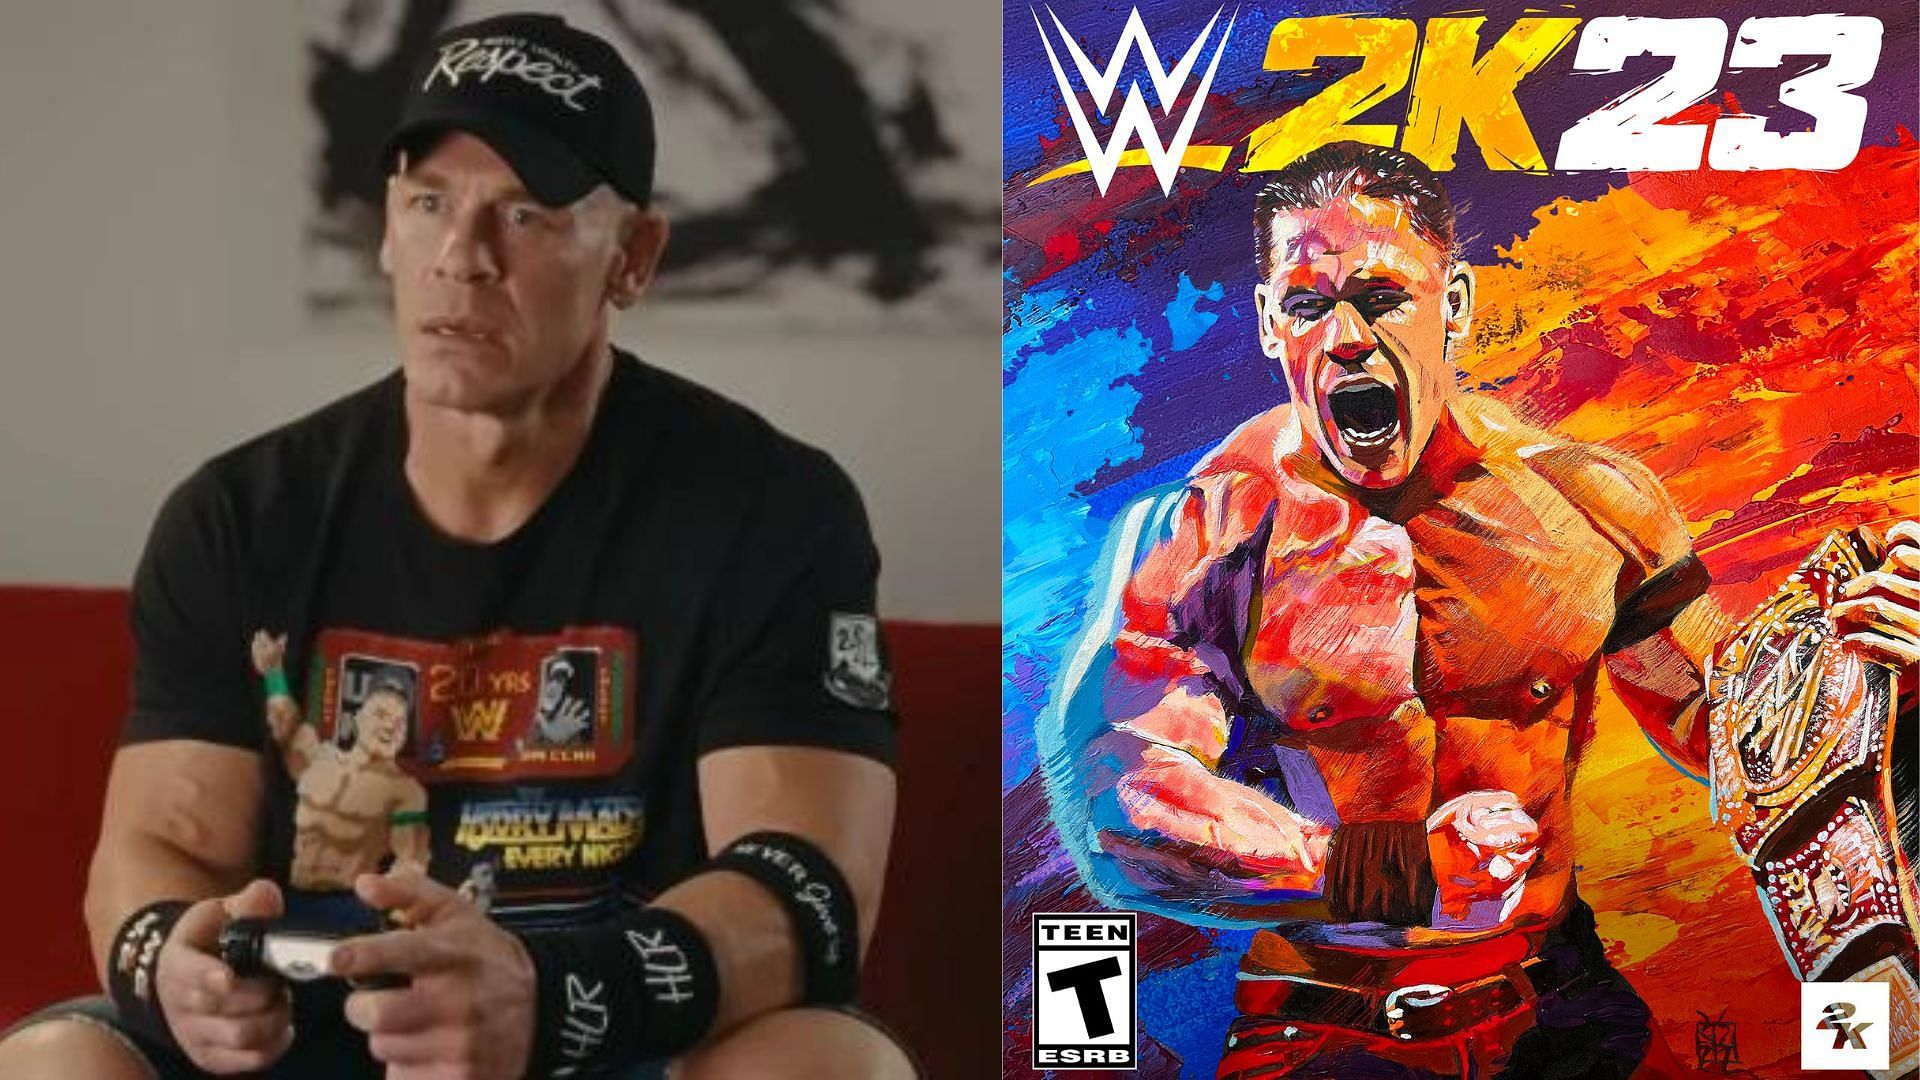 A number of celebrities and superstars appeared with John Cena on WWE 2K23 cover video